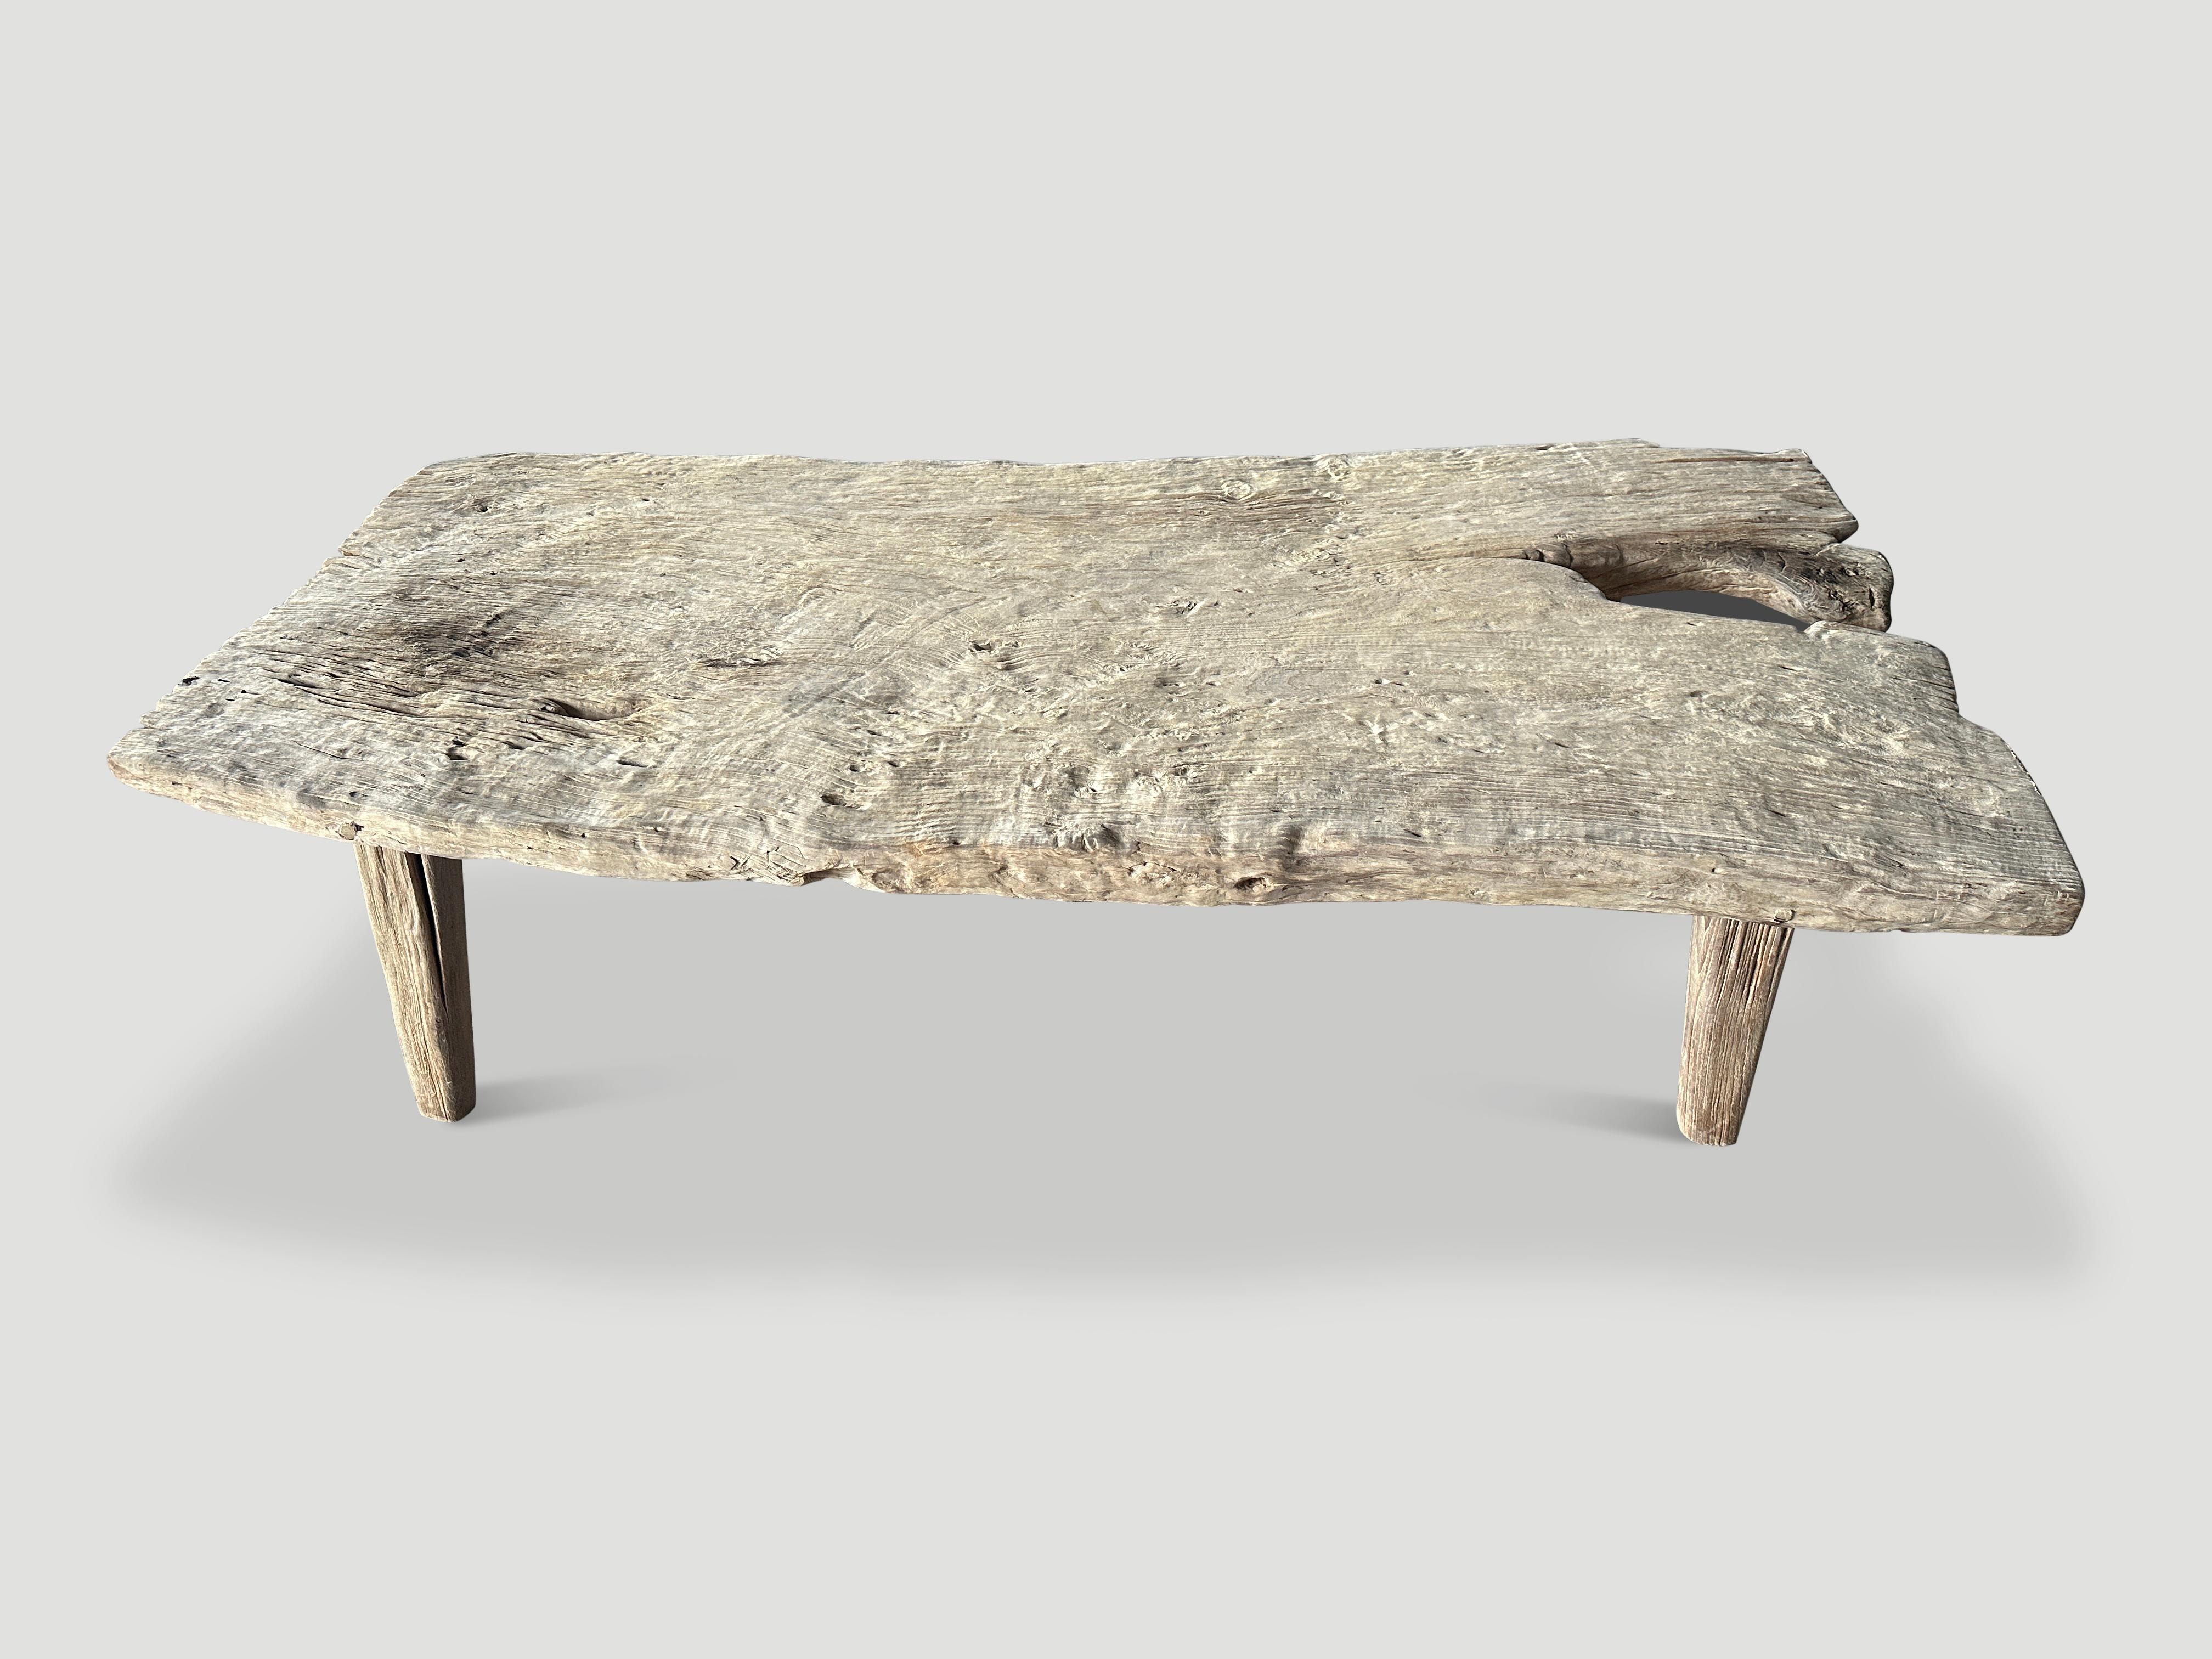 Beautiful century old two inch single teak slab coffee table with impressive erosion detail. Left in the sun and sea salt air to naturally turn this pale tone. We added minimalist legs. It’s all in the details.

The St. Barts Collection features an